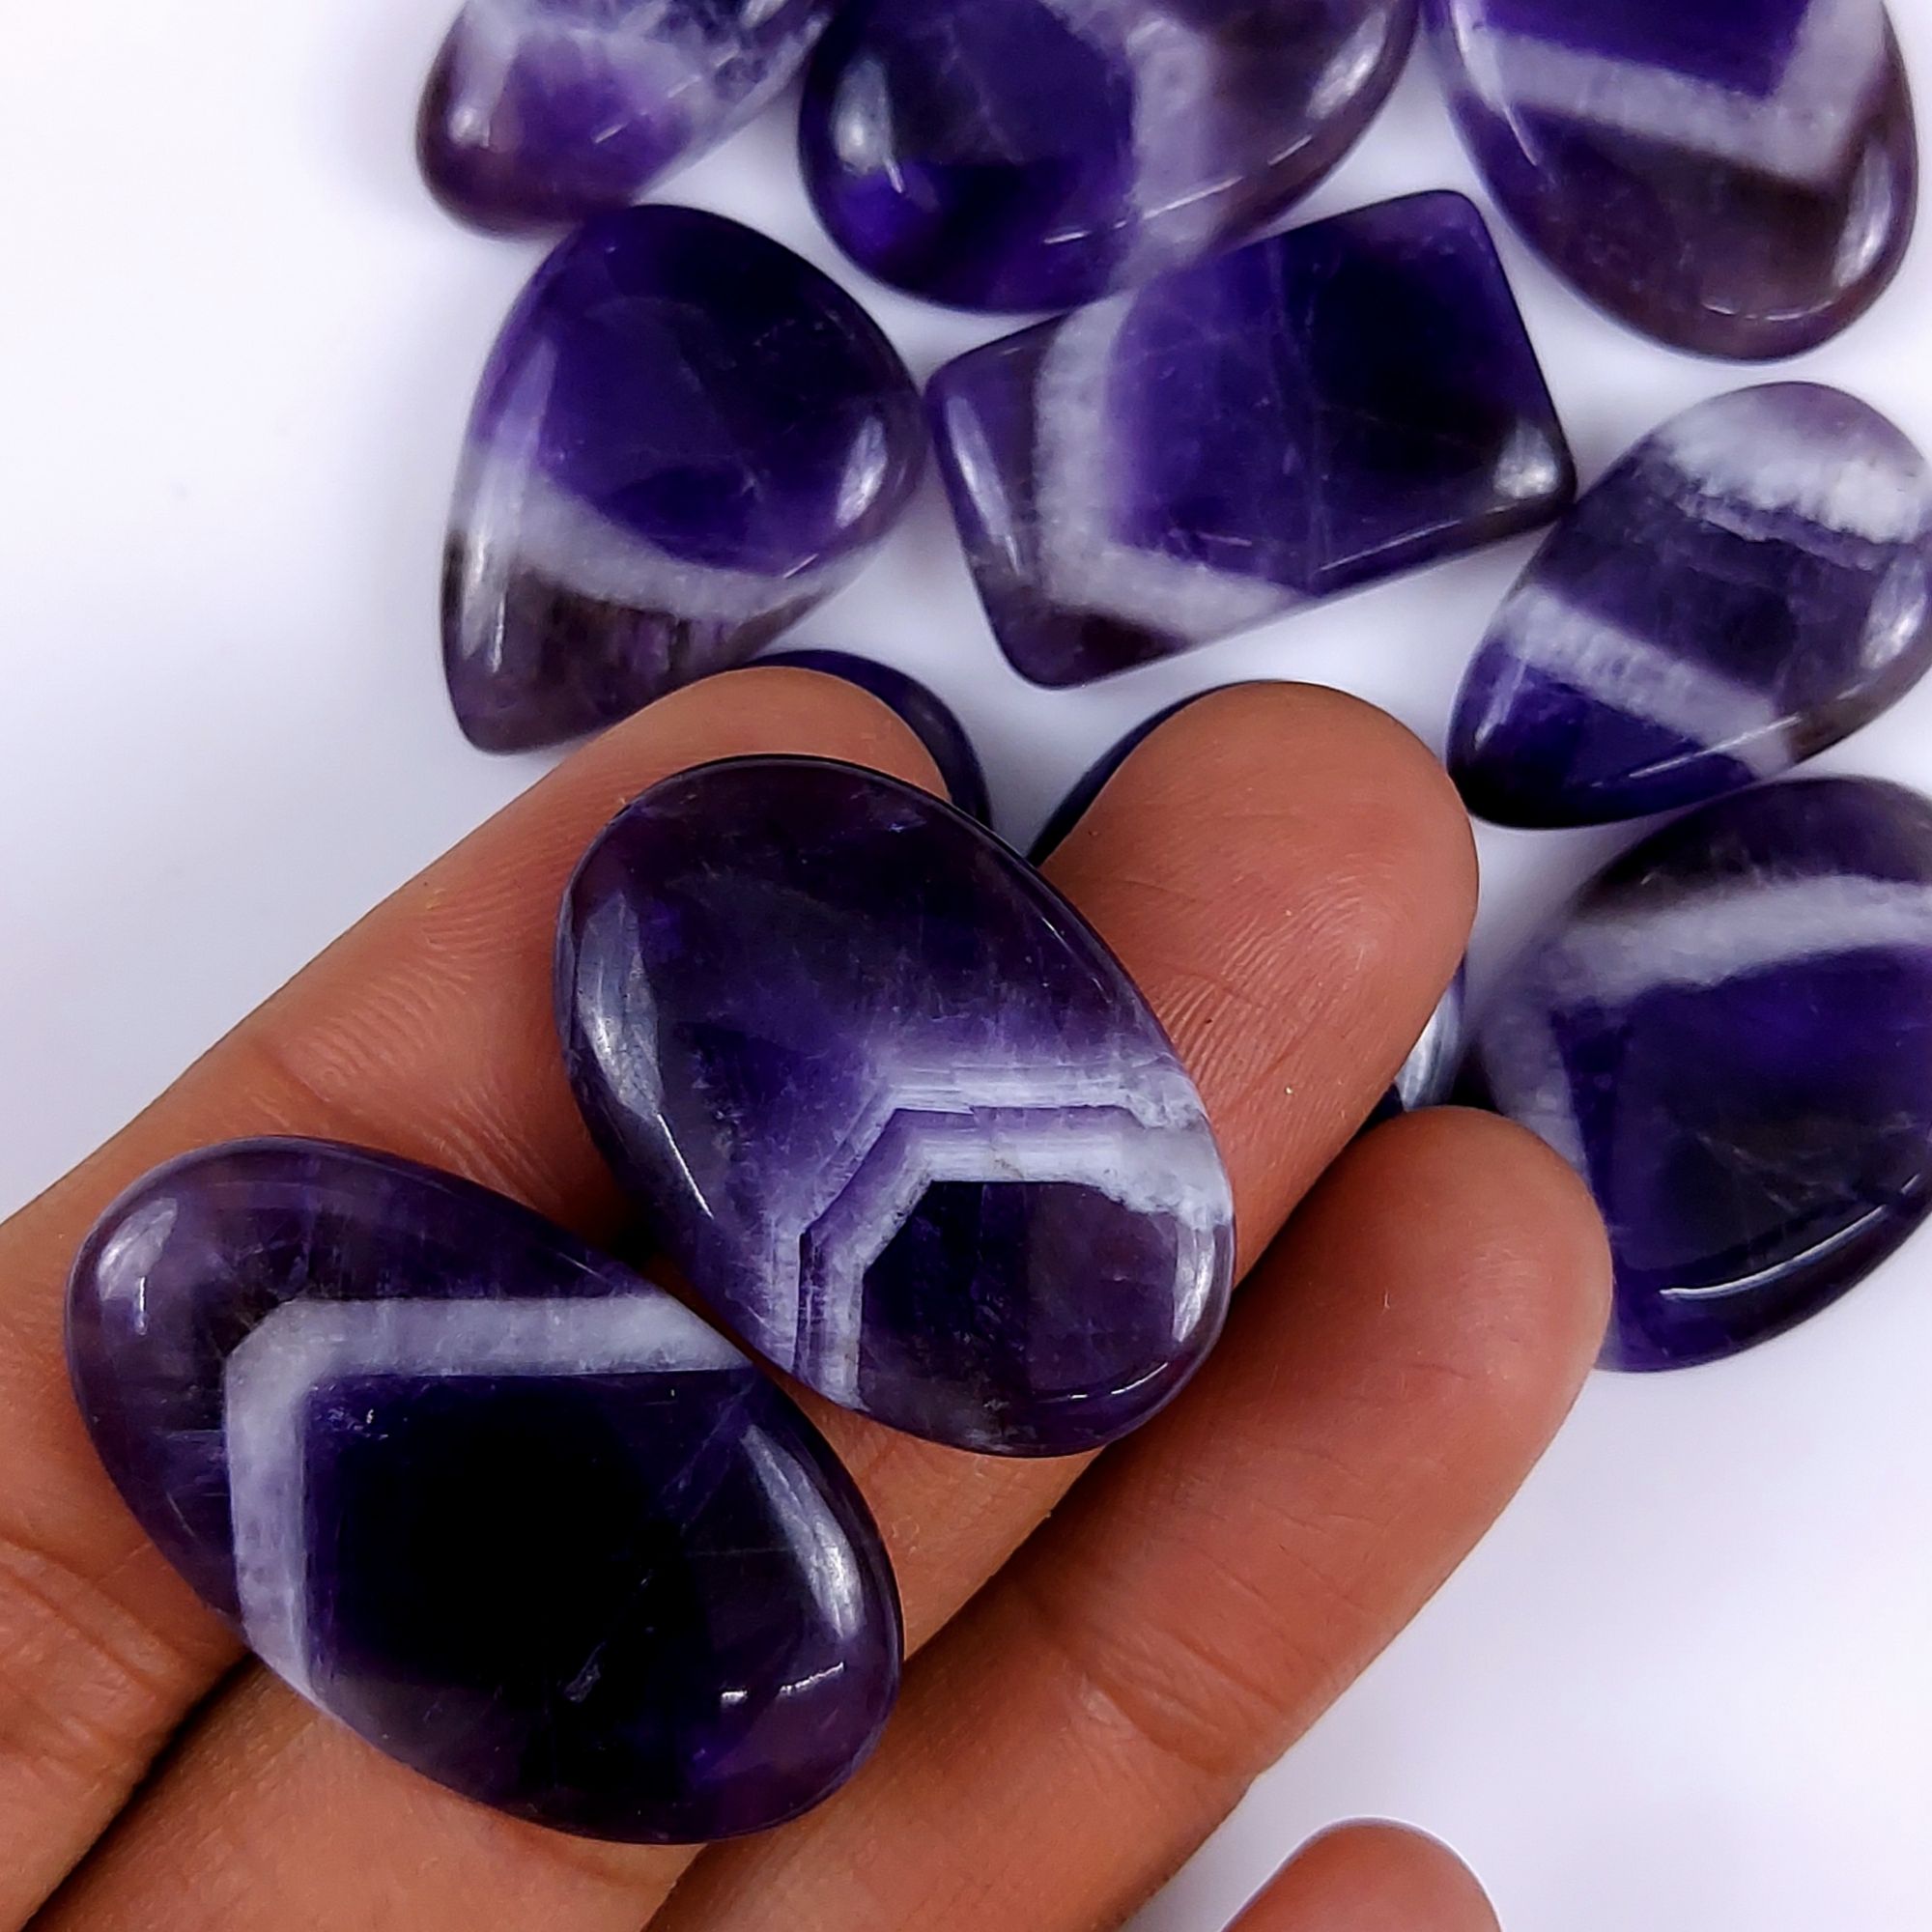 11Pcs 296Cts Natural Amethyst Cabochon lot Gemstone Purple Crystal Mix Shape Loose Gemstone beads for jewelry Making 34x22 24x12mm#7513